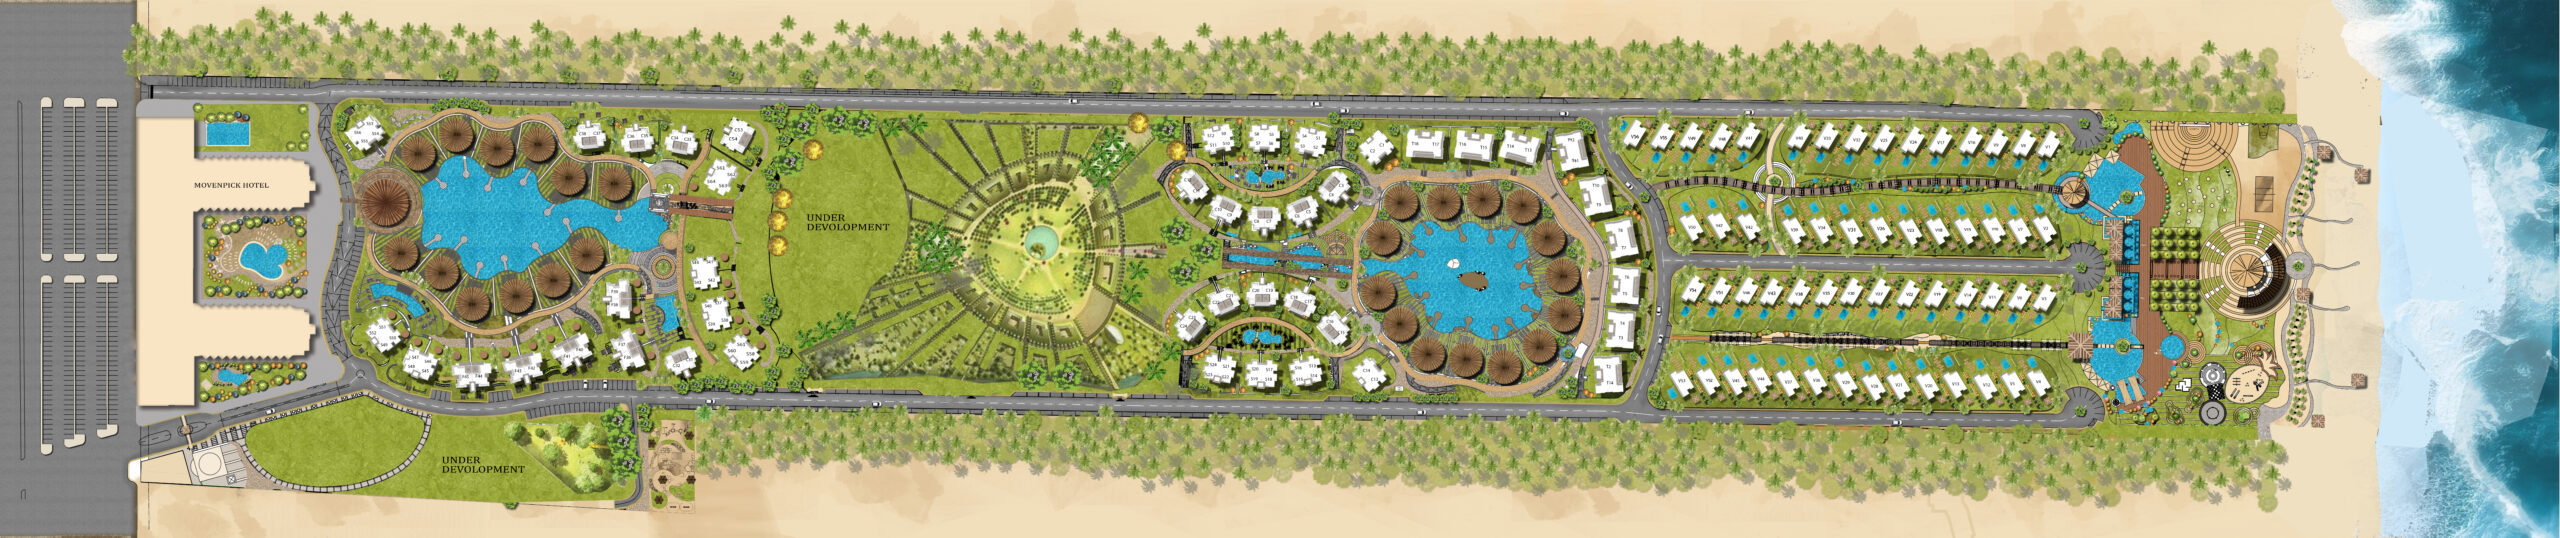 151m Bungalows Resort with payment facilities